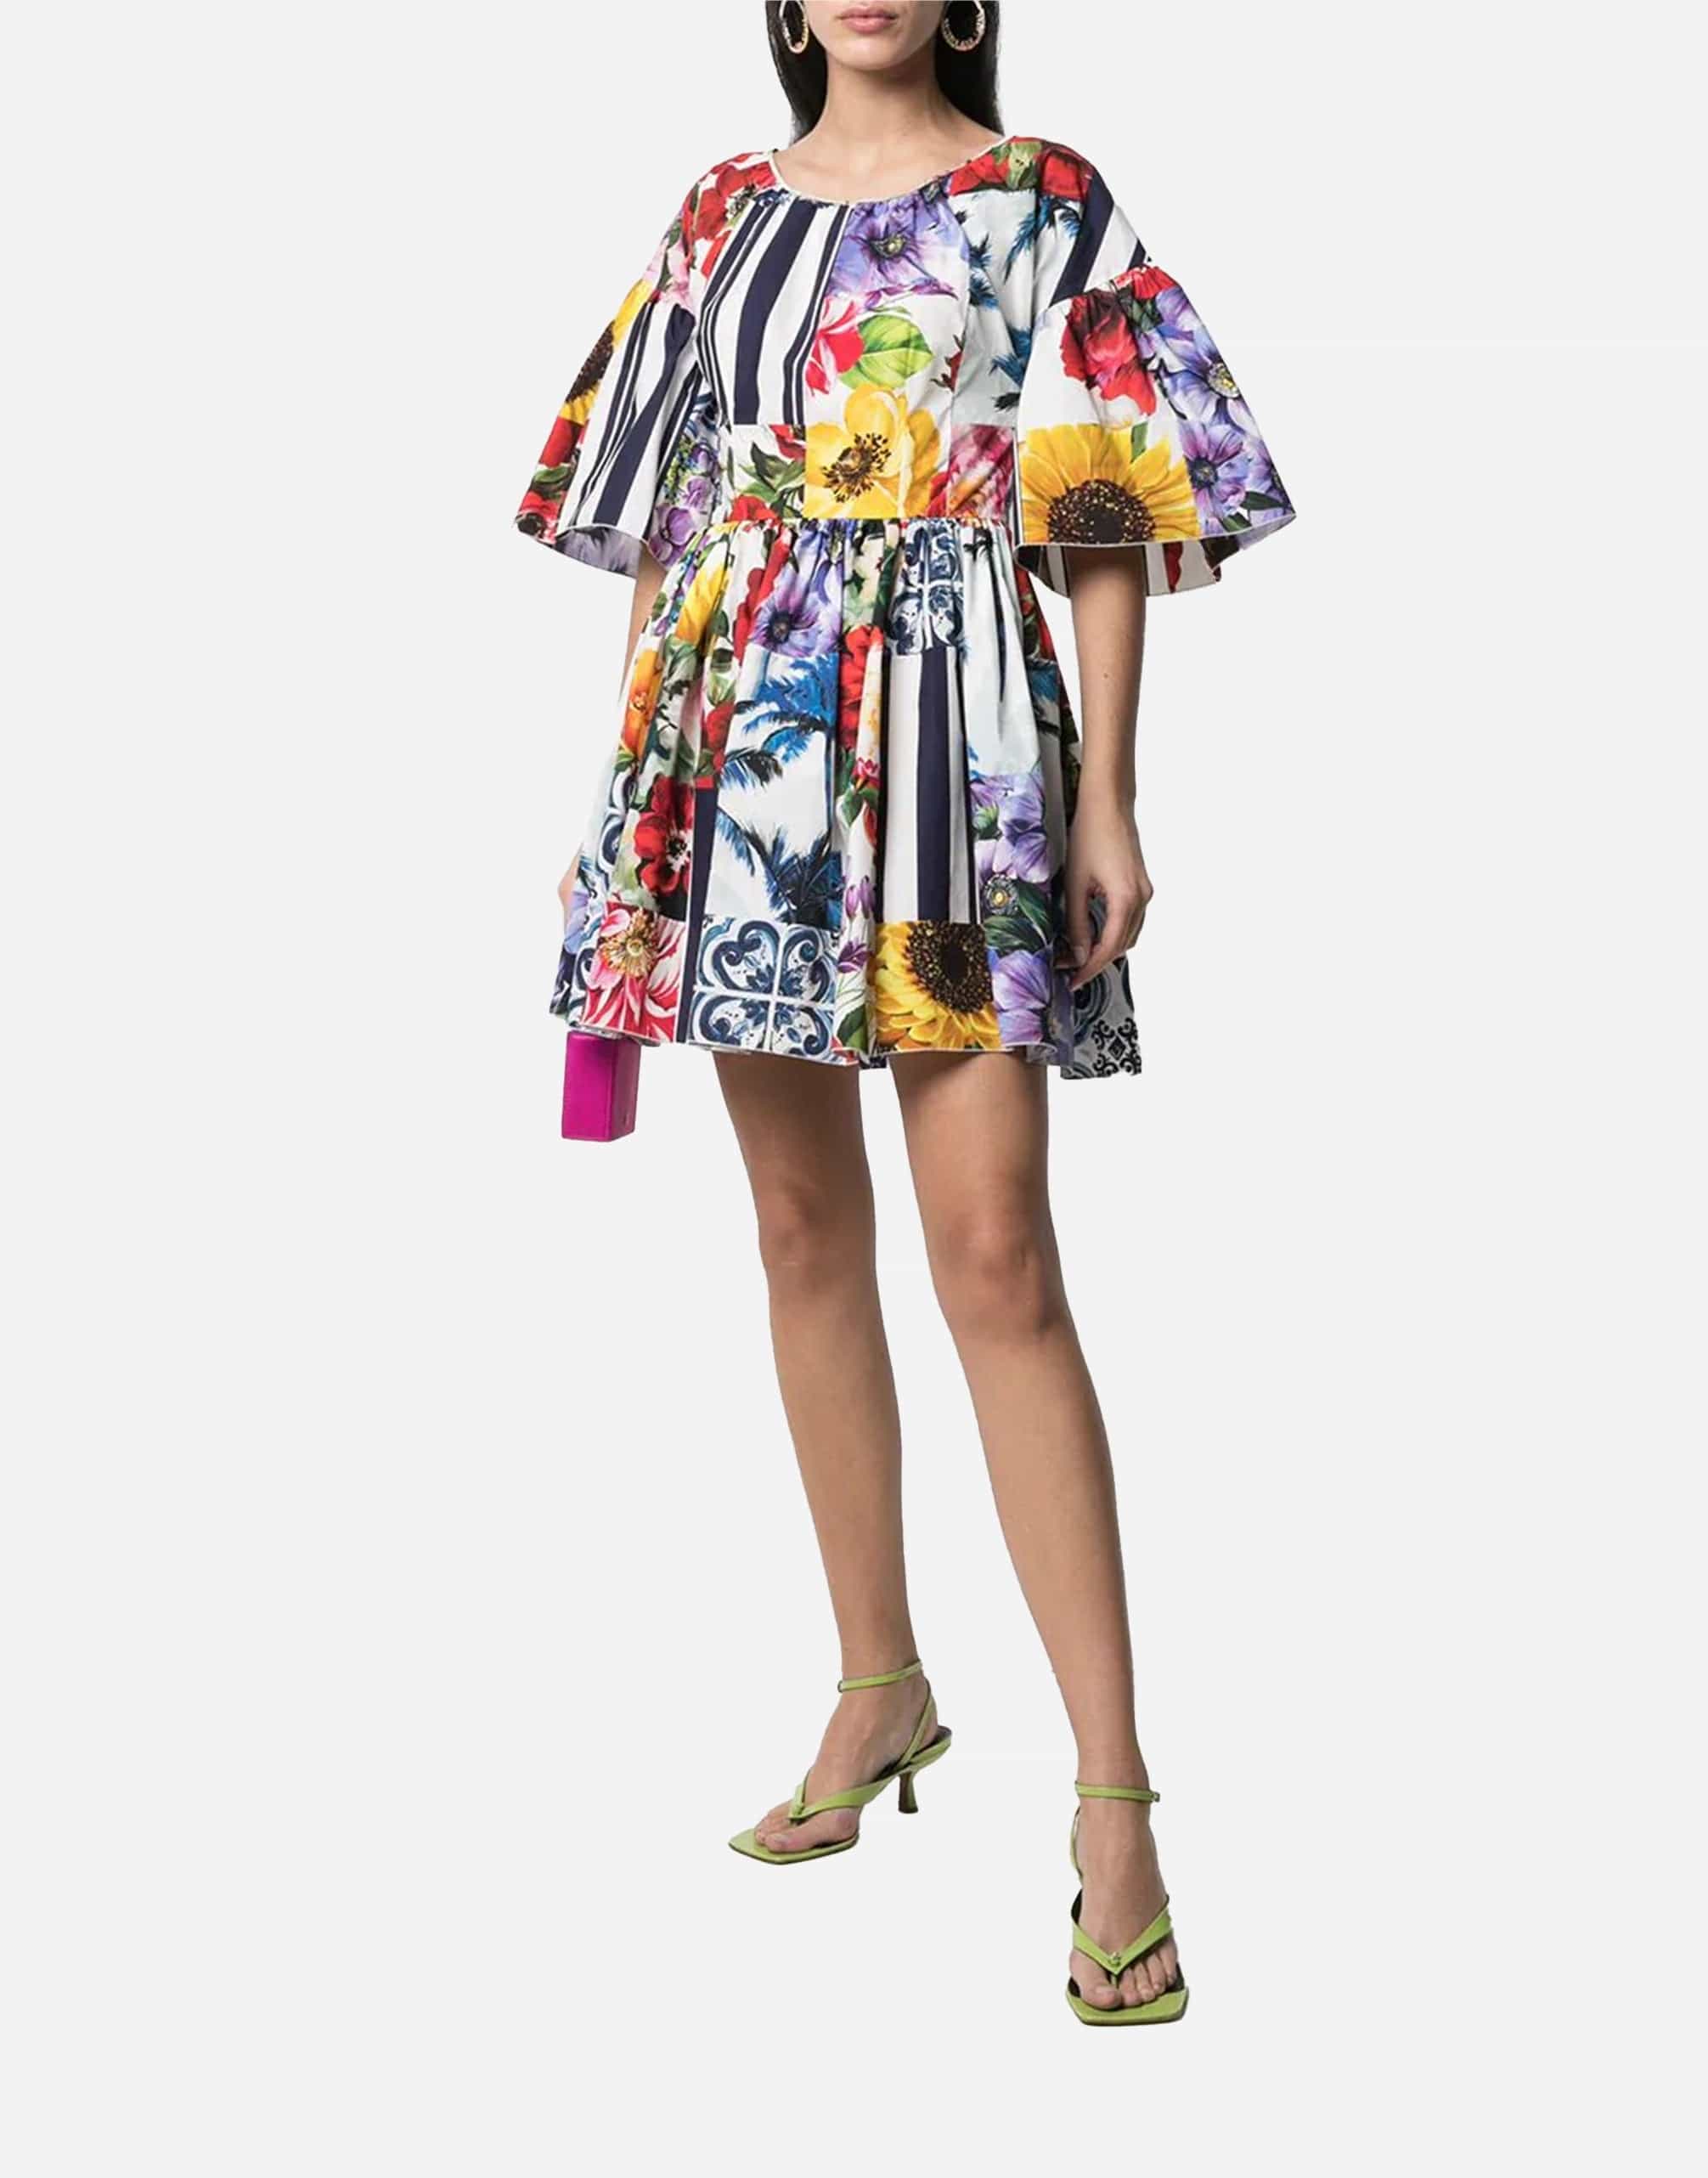 Dolce & Gabbana Patchwork Fit-And-Flare Mini Dress